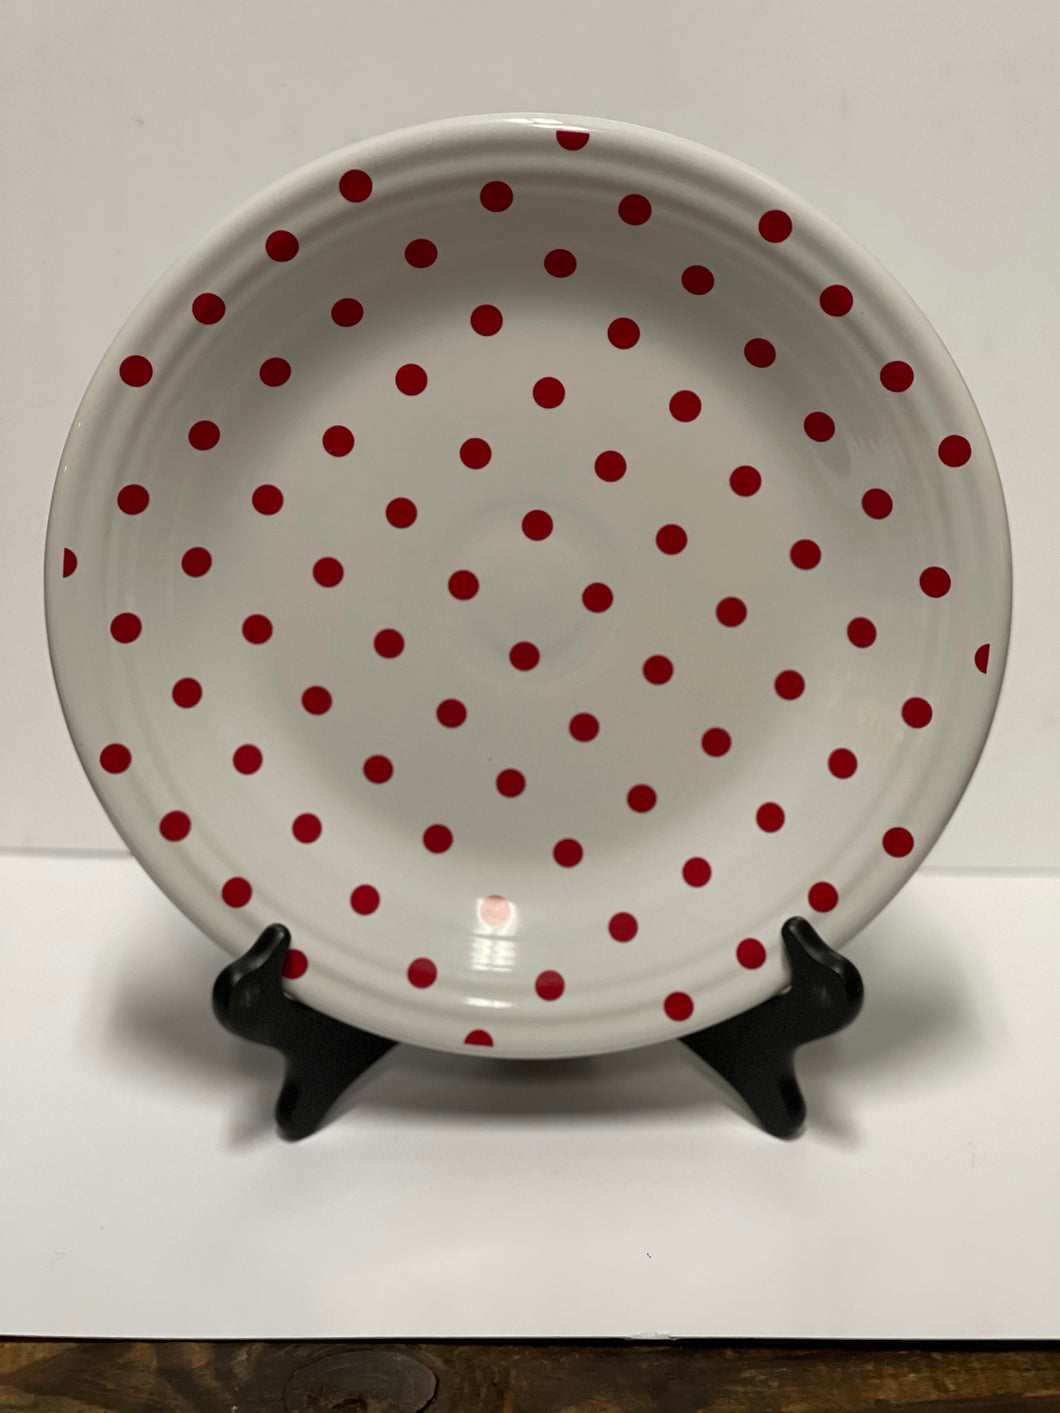 Fiesta Exclusive White Dinner Plate Scarlet Red Polka Dot HLCCA 2010